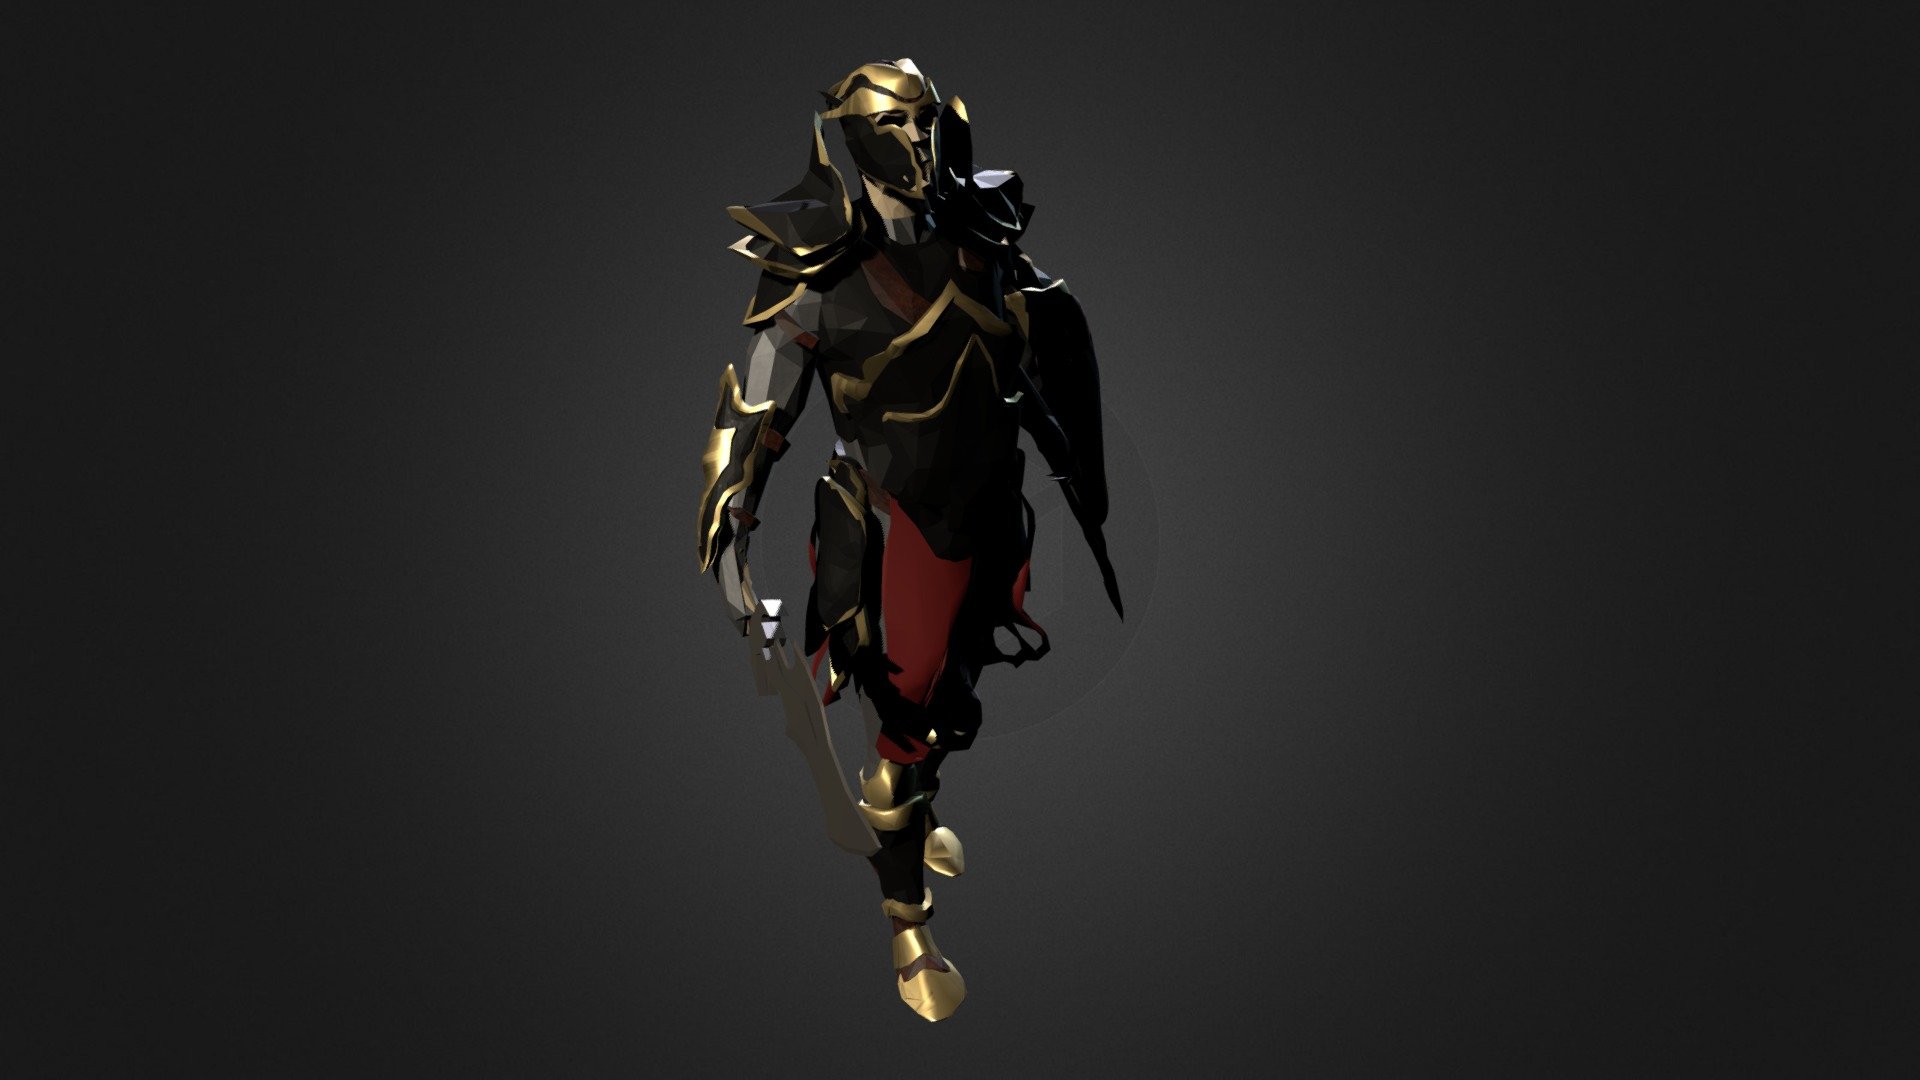 Low Poly Fantasy Knight created for a VR experience 3d model